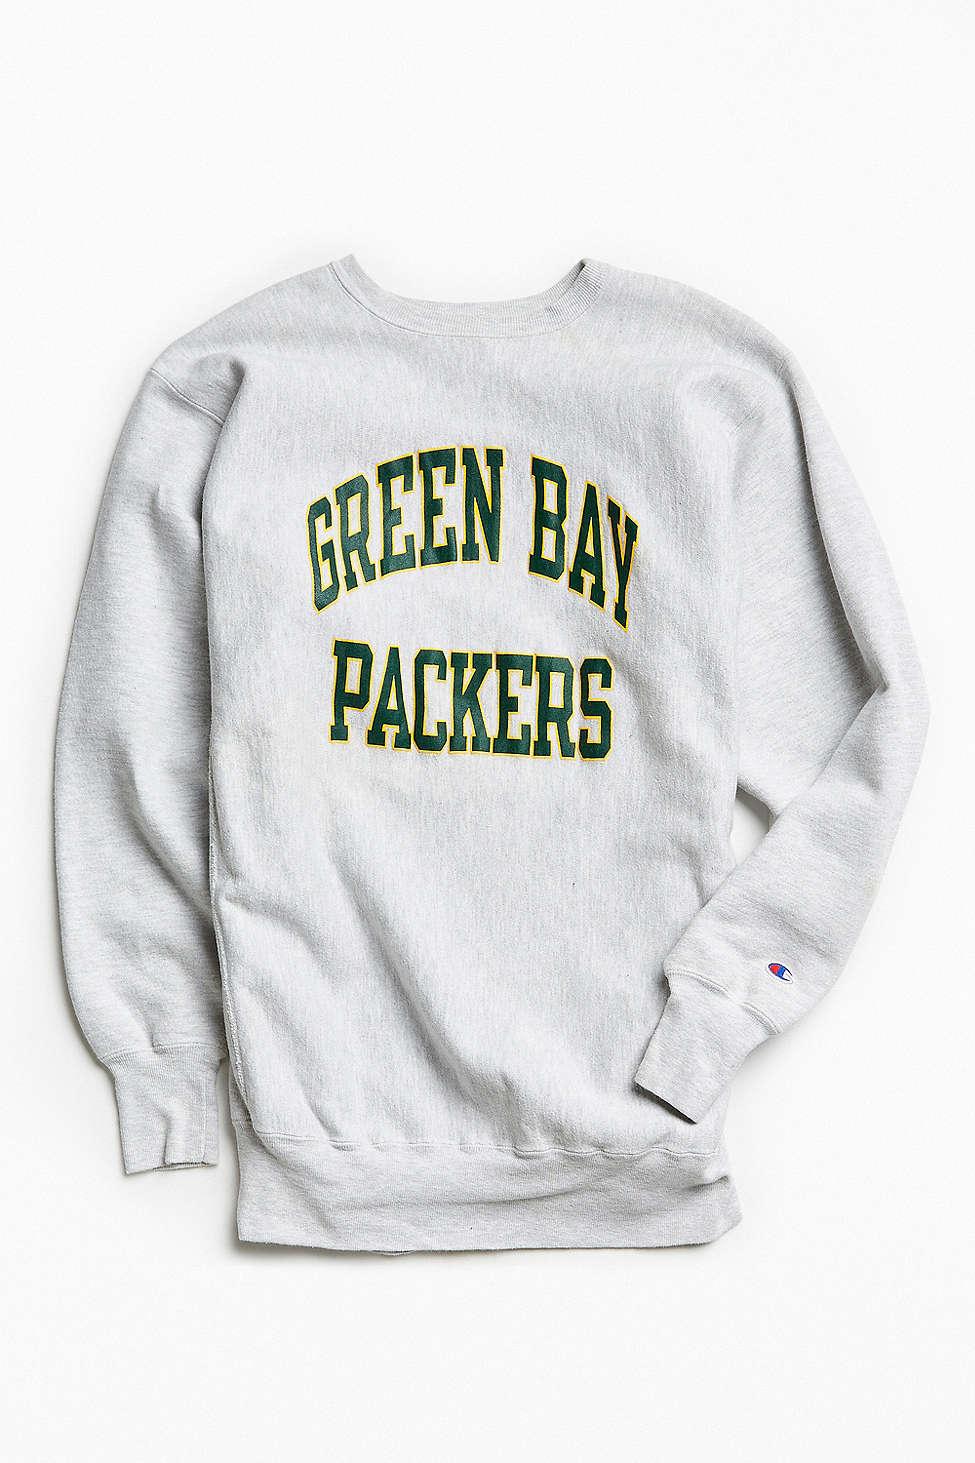 Urban Outfitters Vintage Champion Green Bay Packers Crew Neck Sweatshirt in  Gray for Men